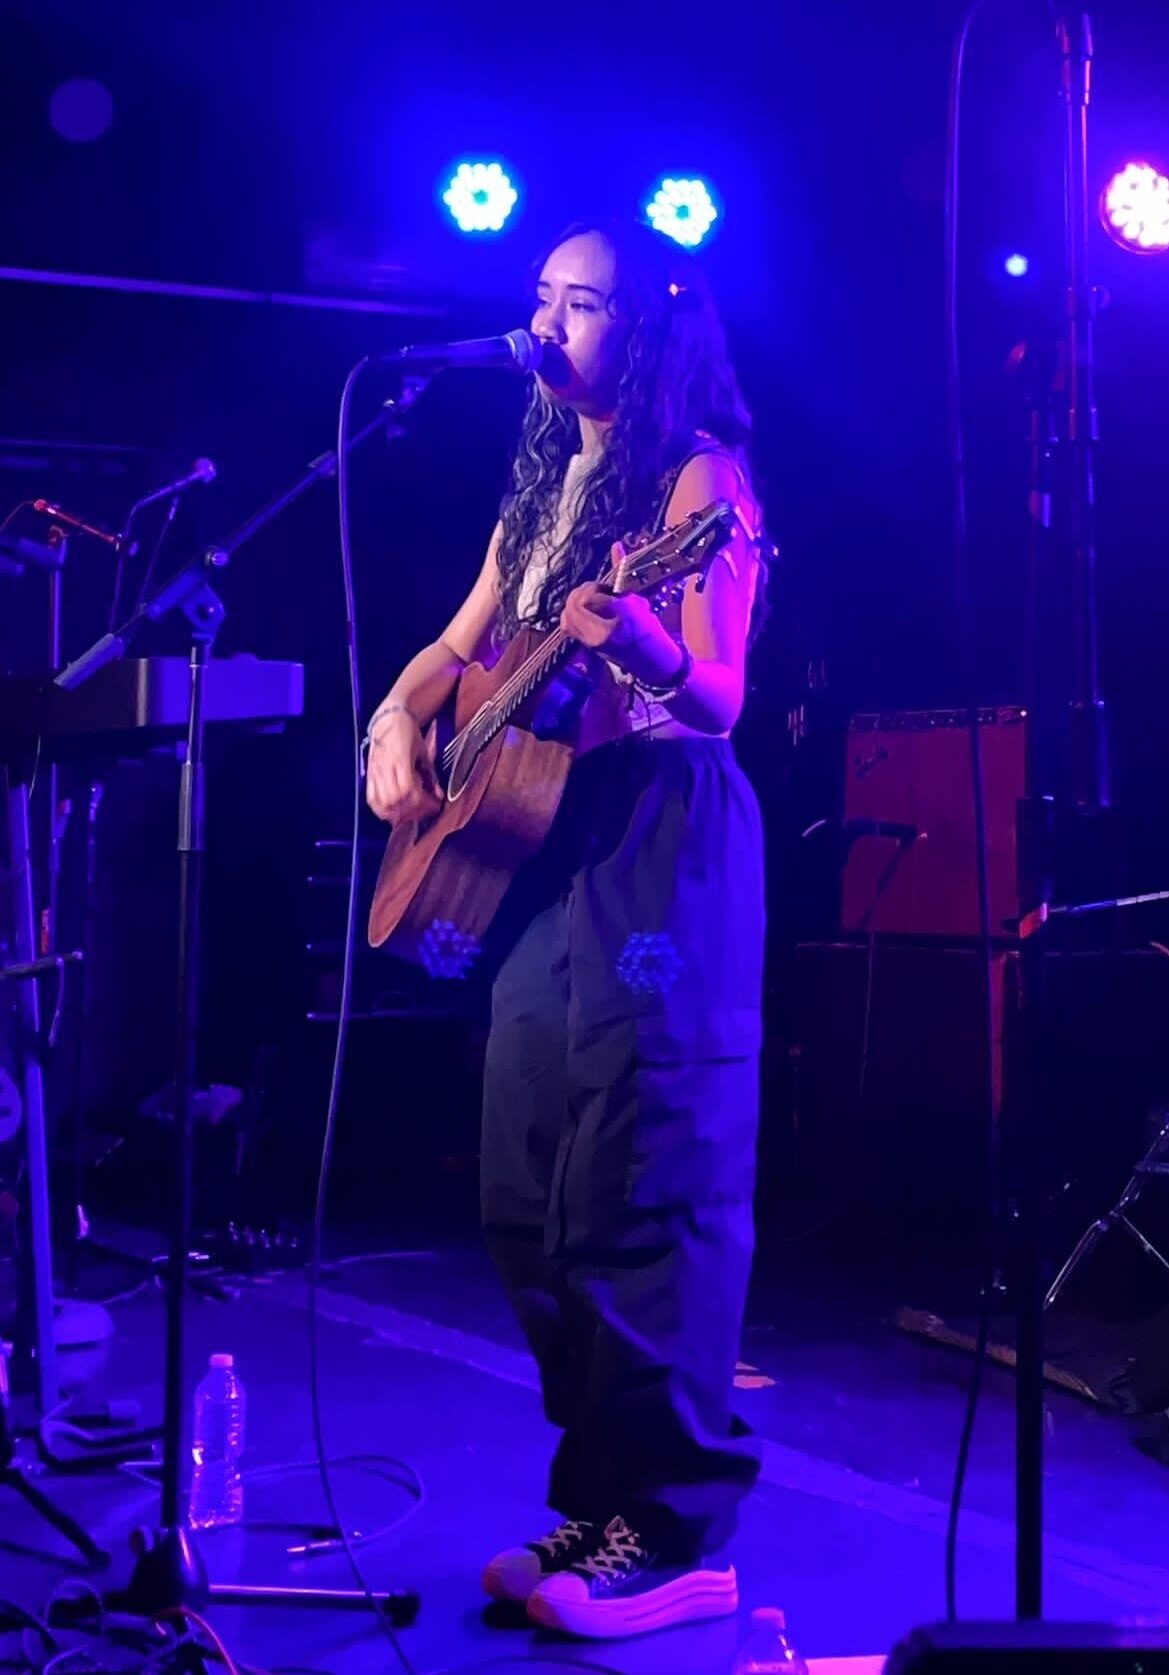 Julia onstage with guitar